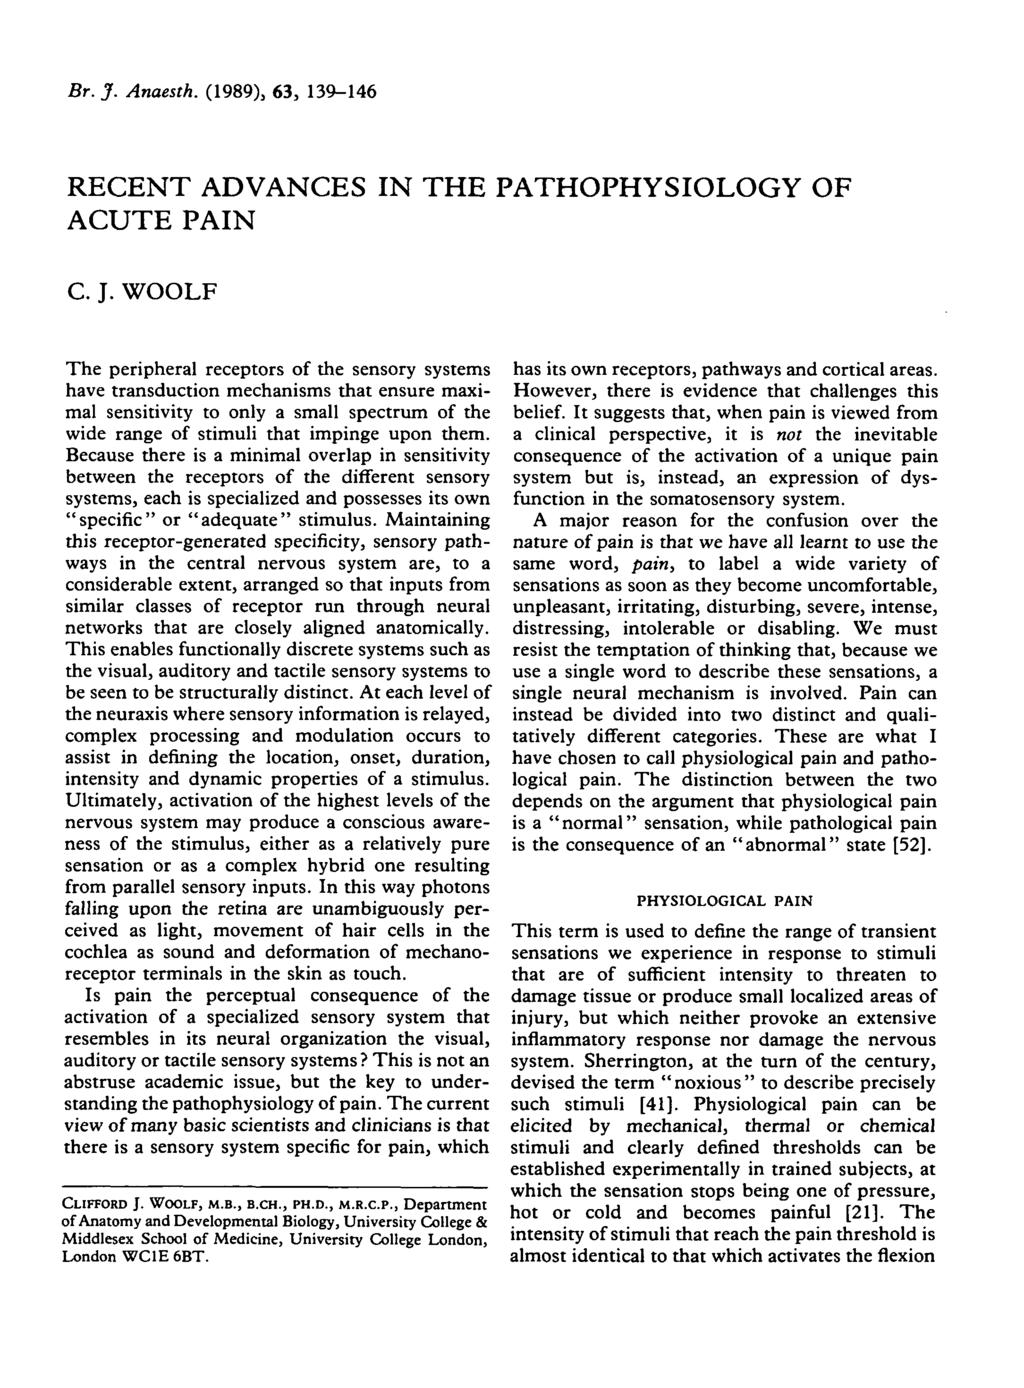 Br. J. Anaesth. (1989), 63, 139-146 RECENT ADVANCES IN THE PATHOPHYSIOLOGY OF ACUTE PAIN C. J. WOOLF The peripheral receptors of the sensory systems have transduction mechanisms that ensure maximal sensitivity to only a small spectrum of the wide range of stimuli that impinge upon them.